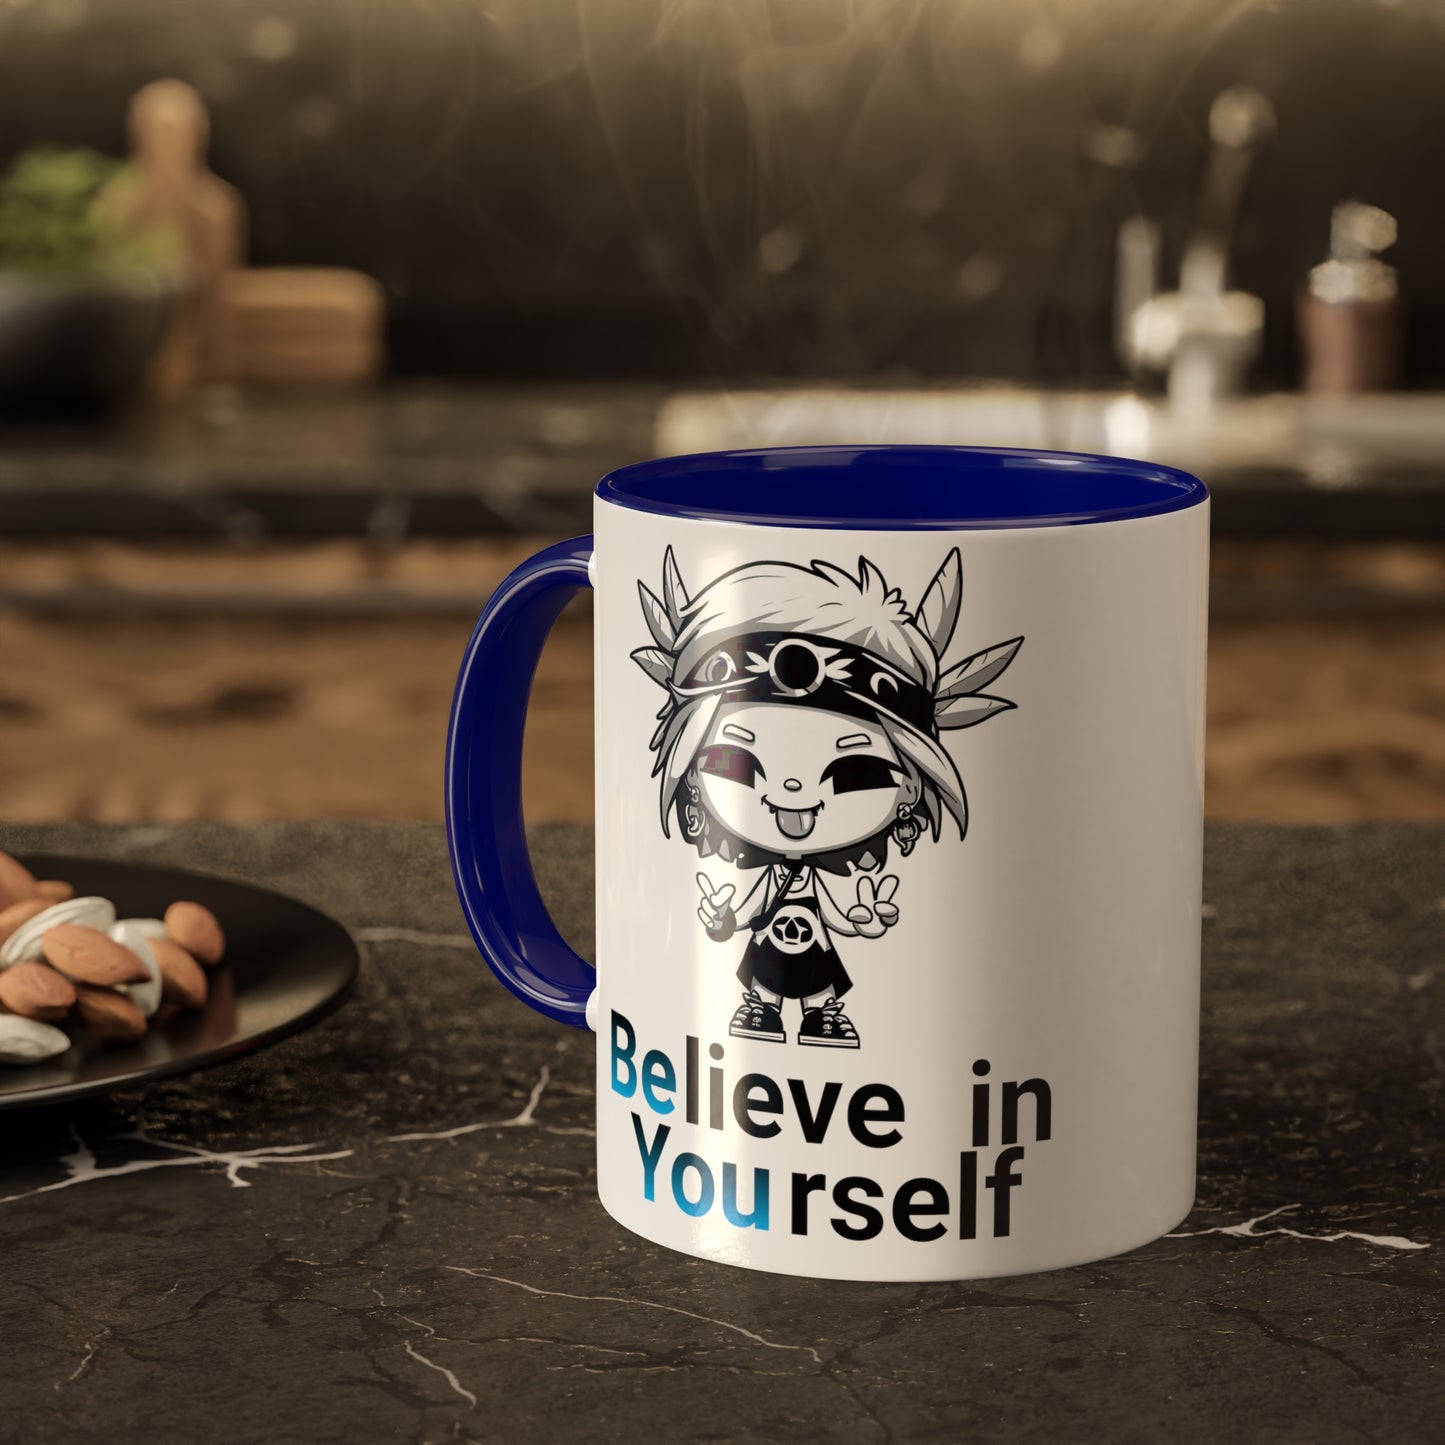 Colorful Mugs, 11oz, Believe in yourself chibi